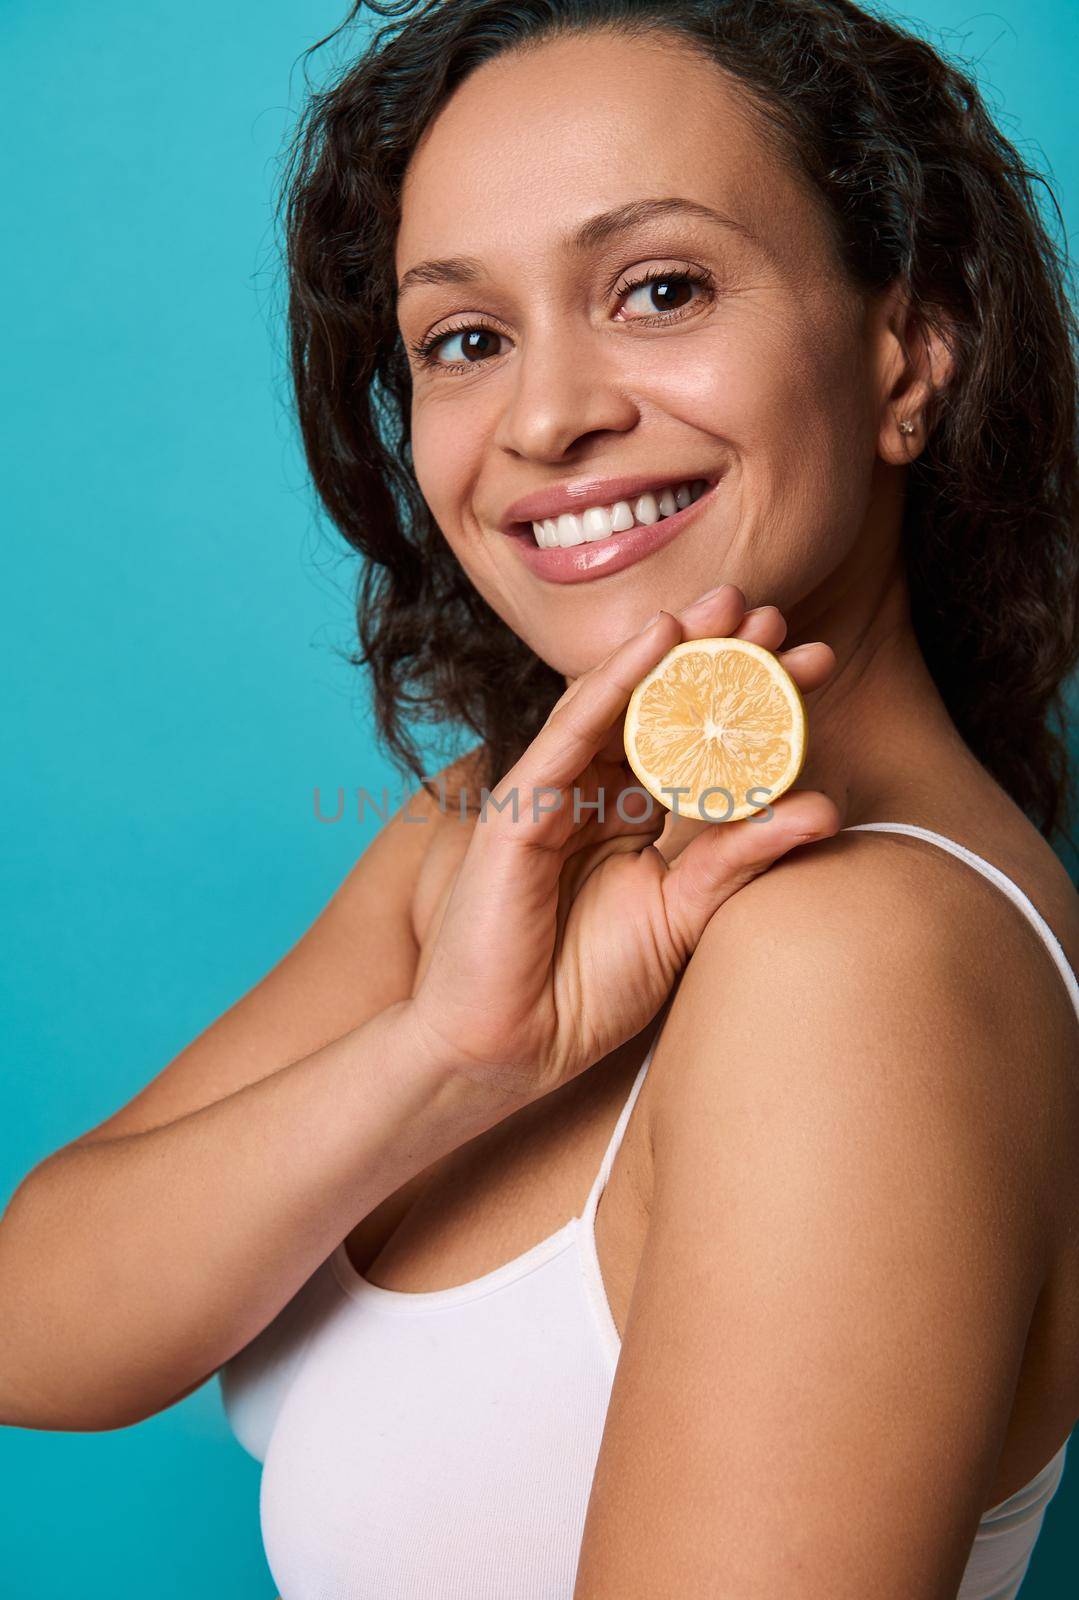 Side portrait of attractive delighted woman holding a half of yellow fresh juicy lemon near her face and smiling with beautiful toothy smile posing against bright blue background with copy space by artgf